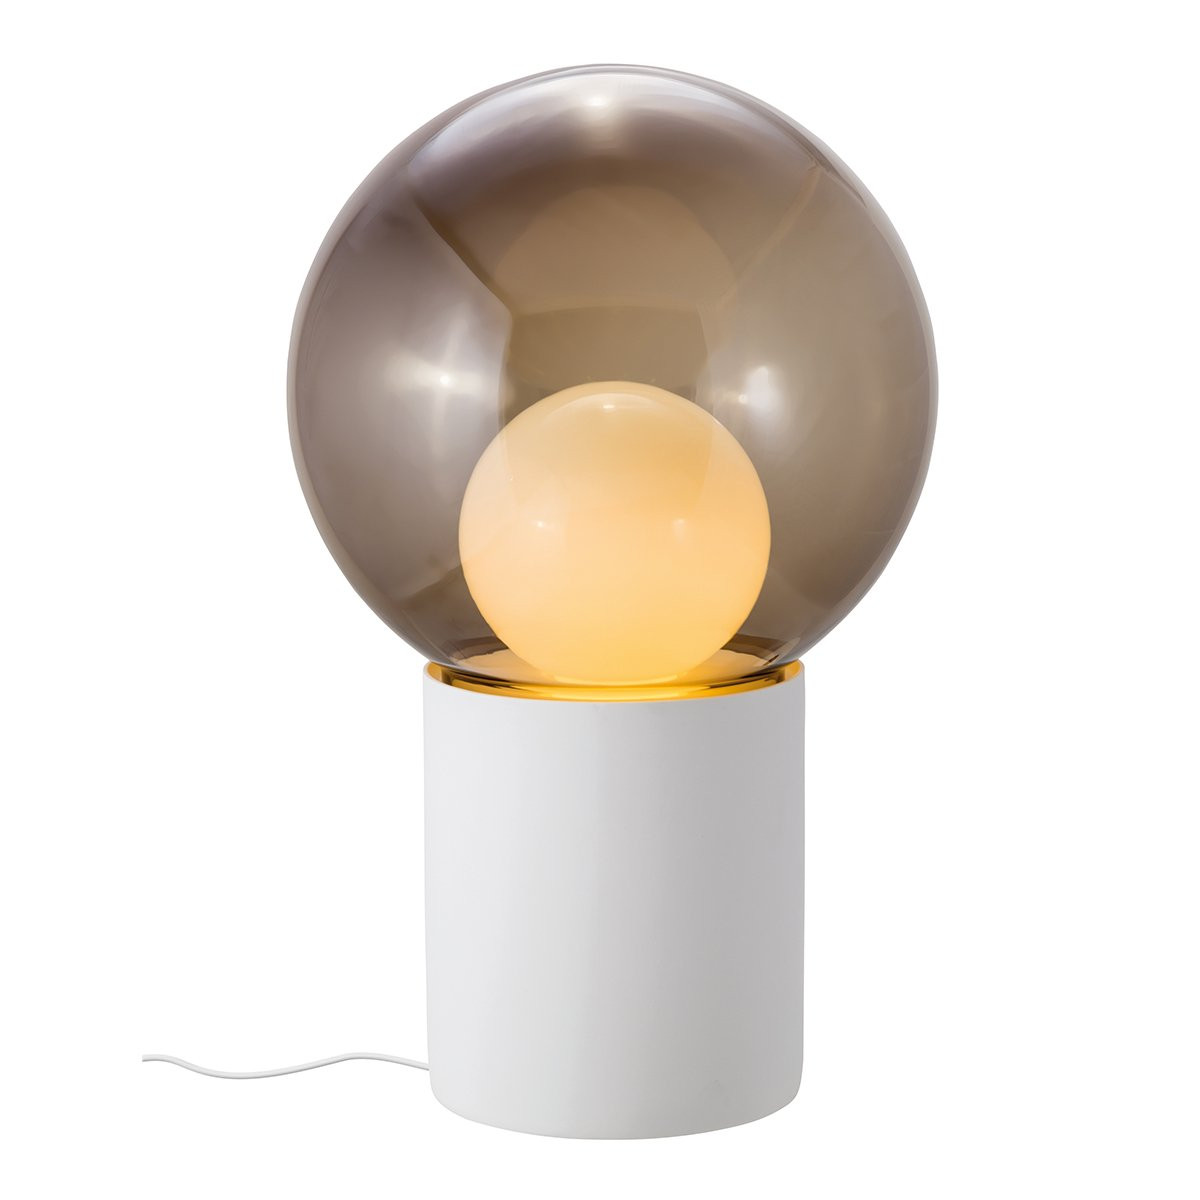 Pulpo Boule High Vloerlamp - Wit / Smoke Grey / Opaal Wit